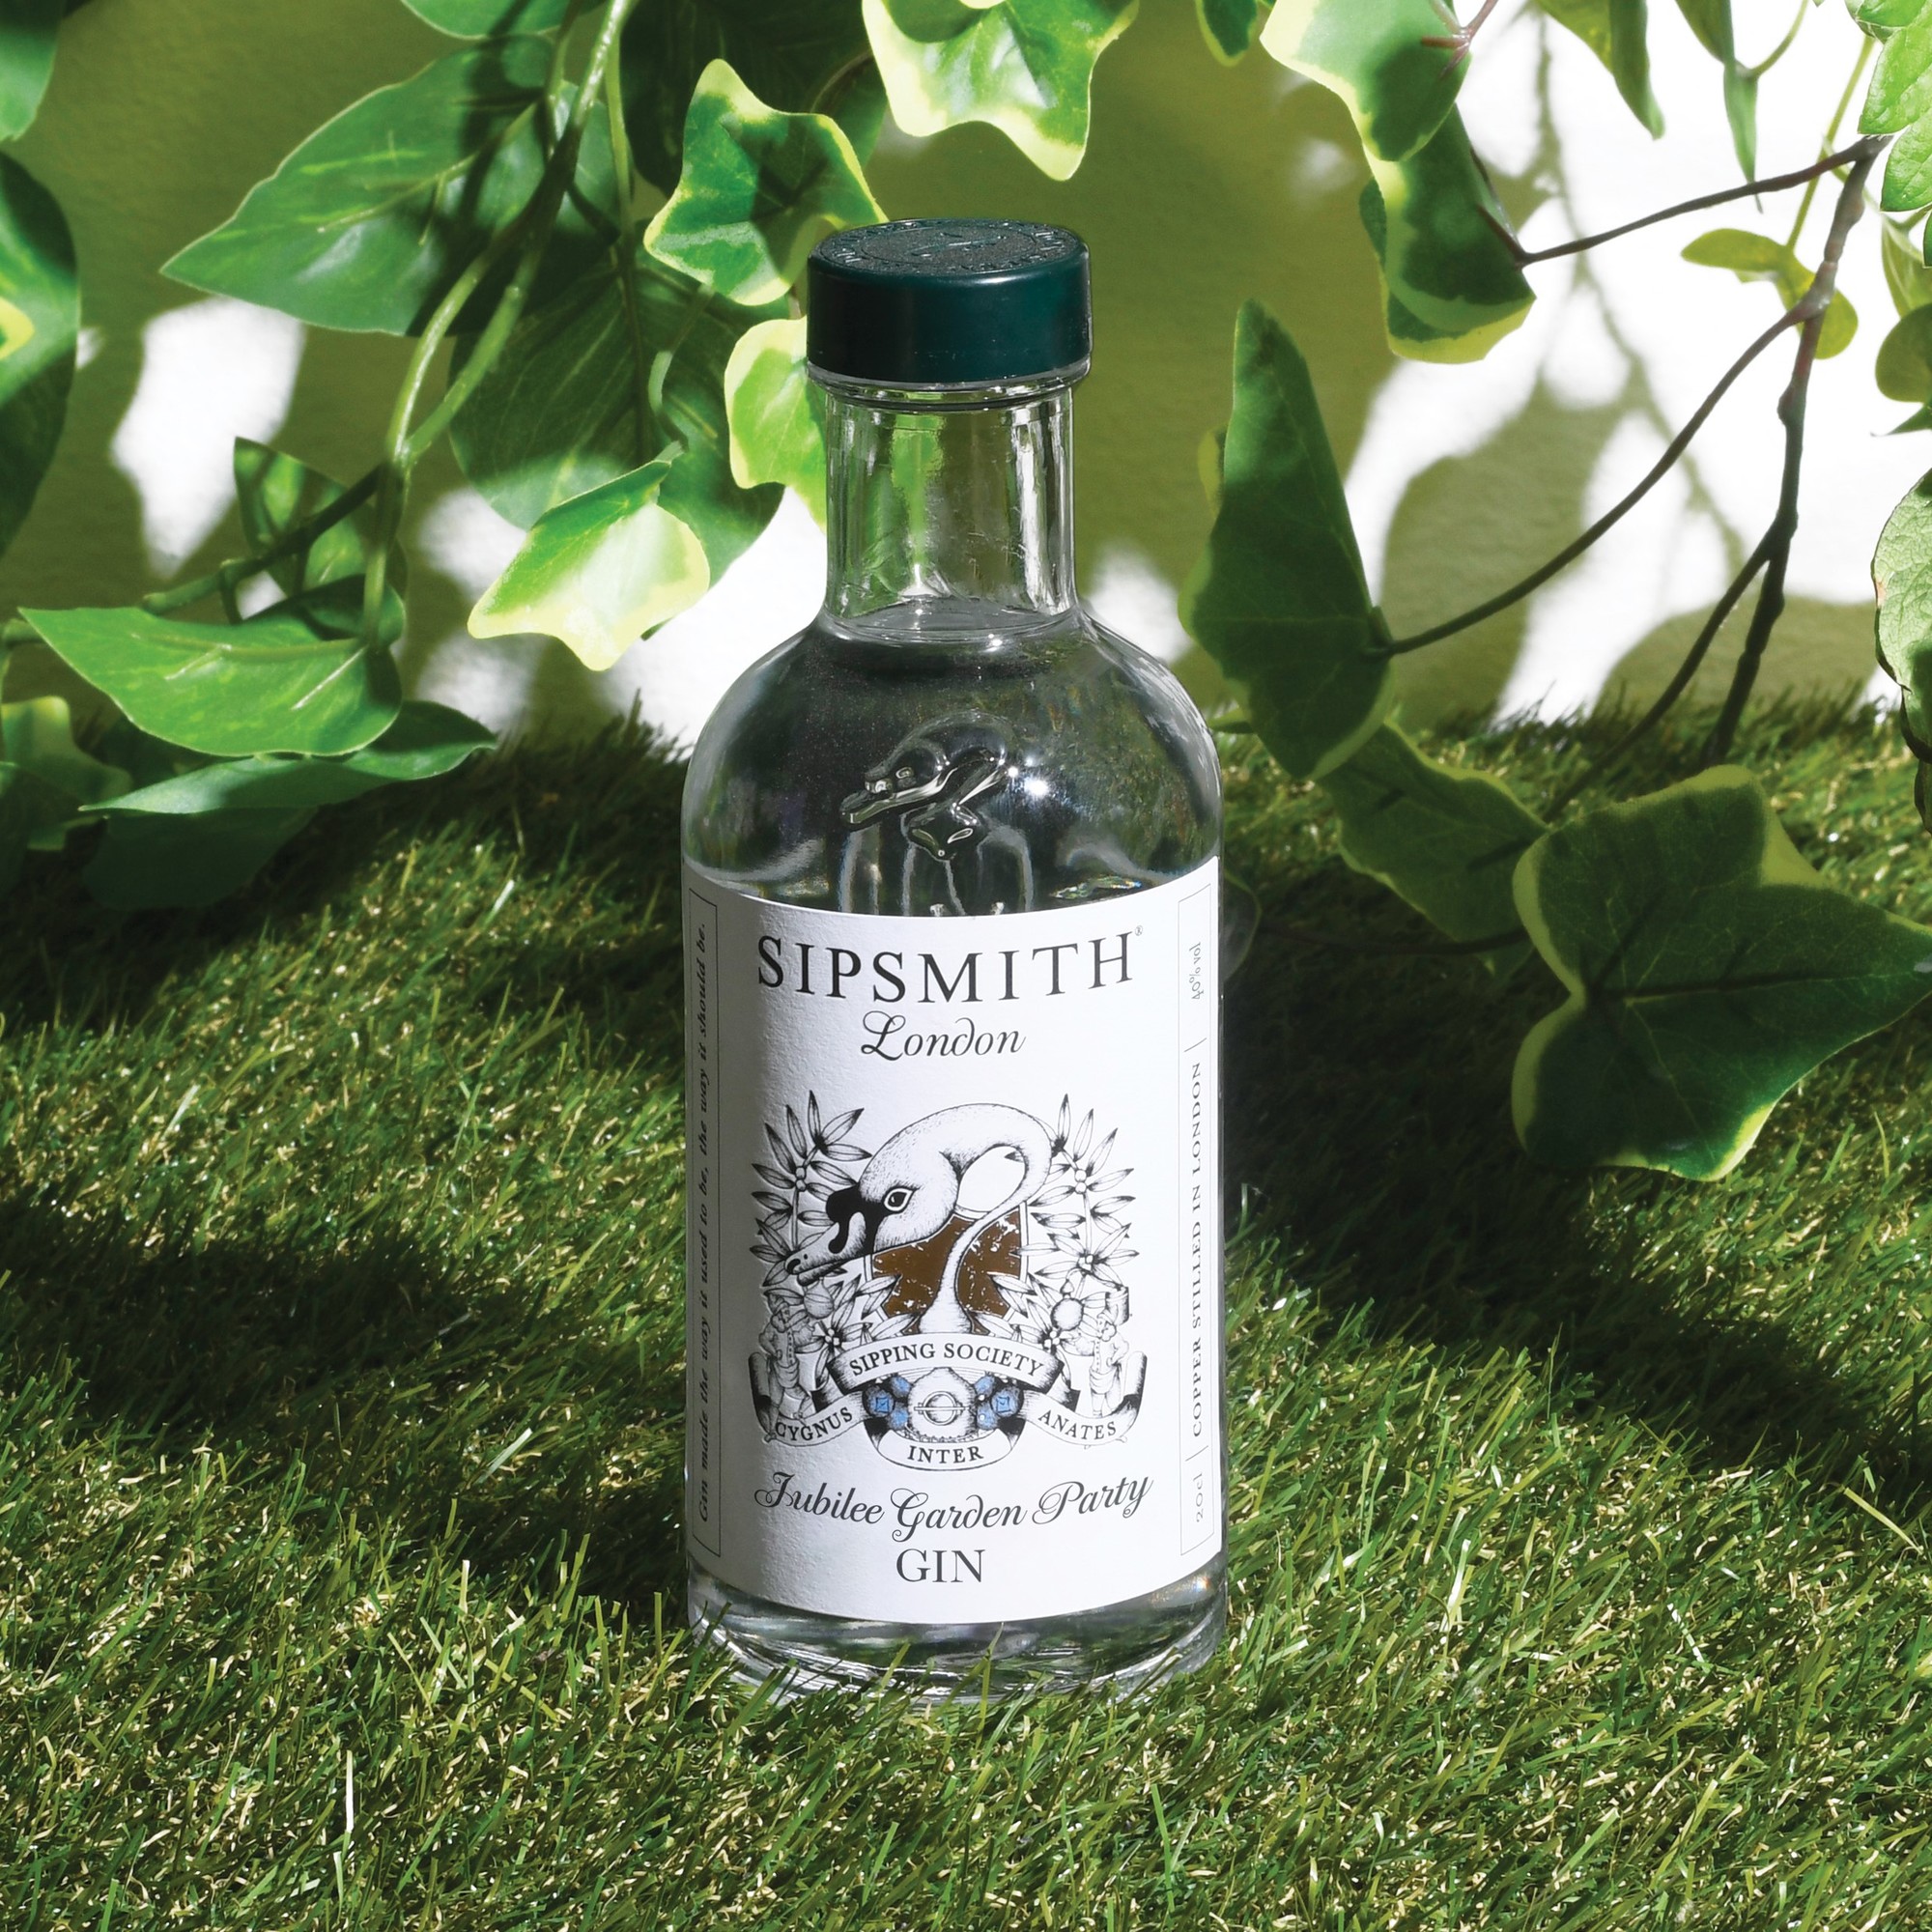 Photo of Sipsmith sipping society jubilee garden party gin